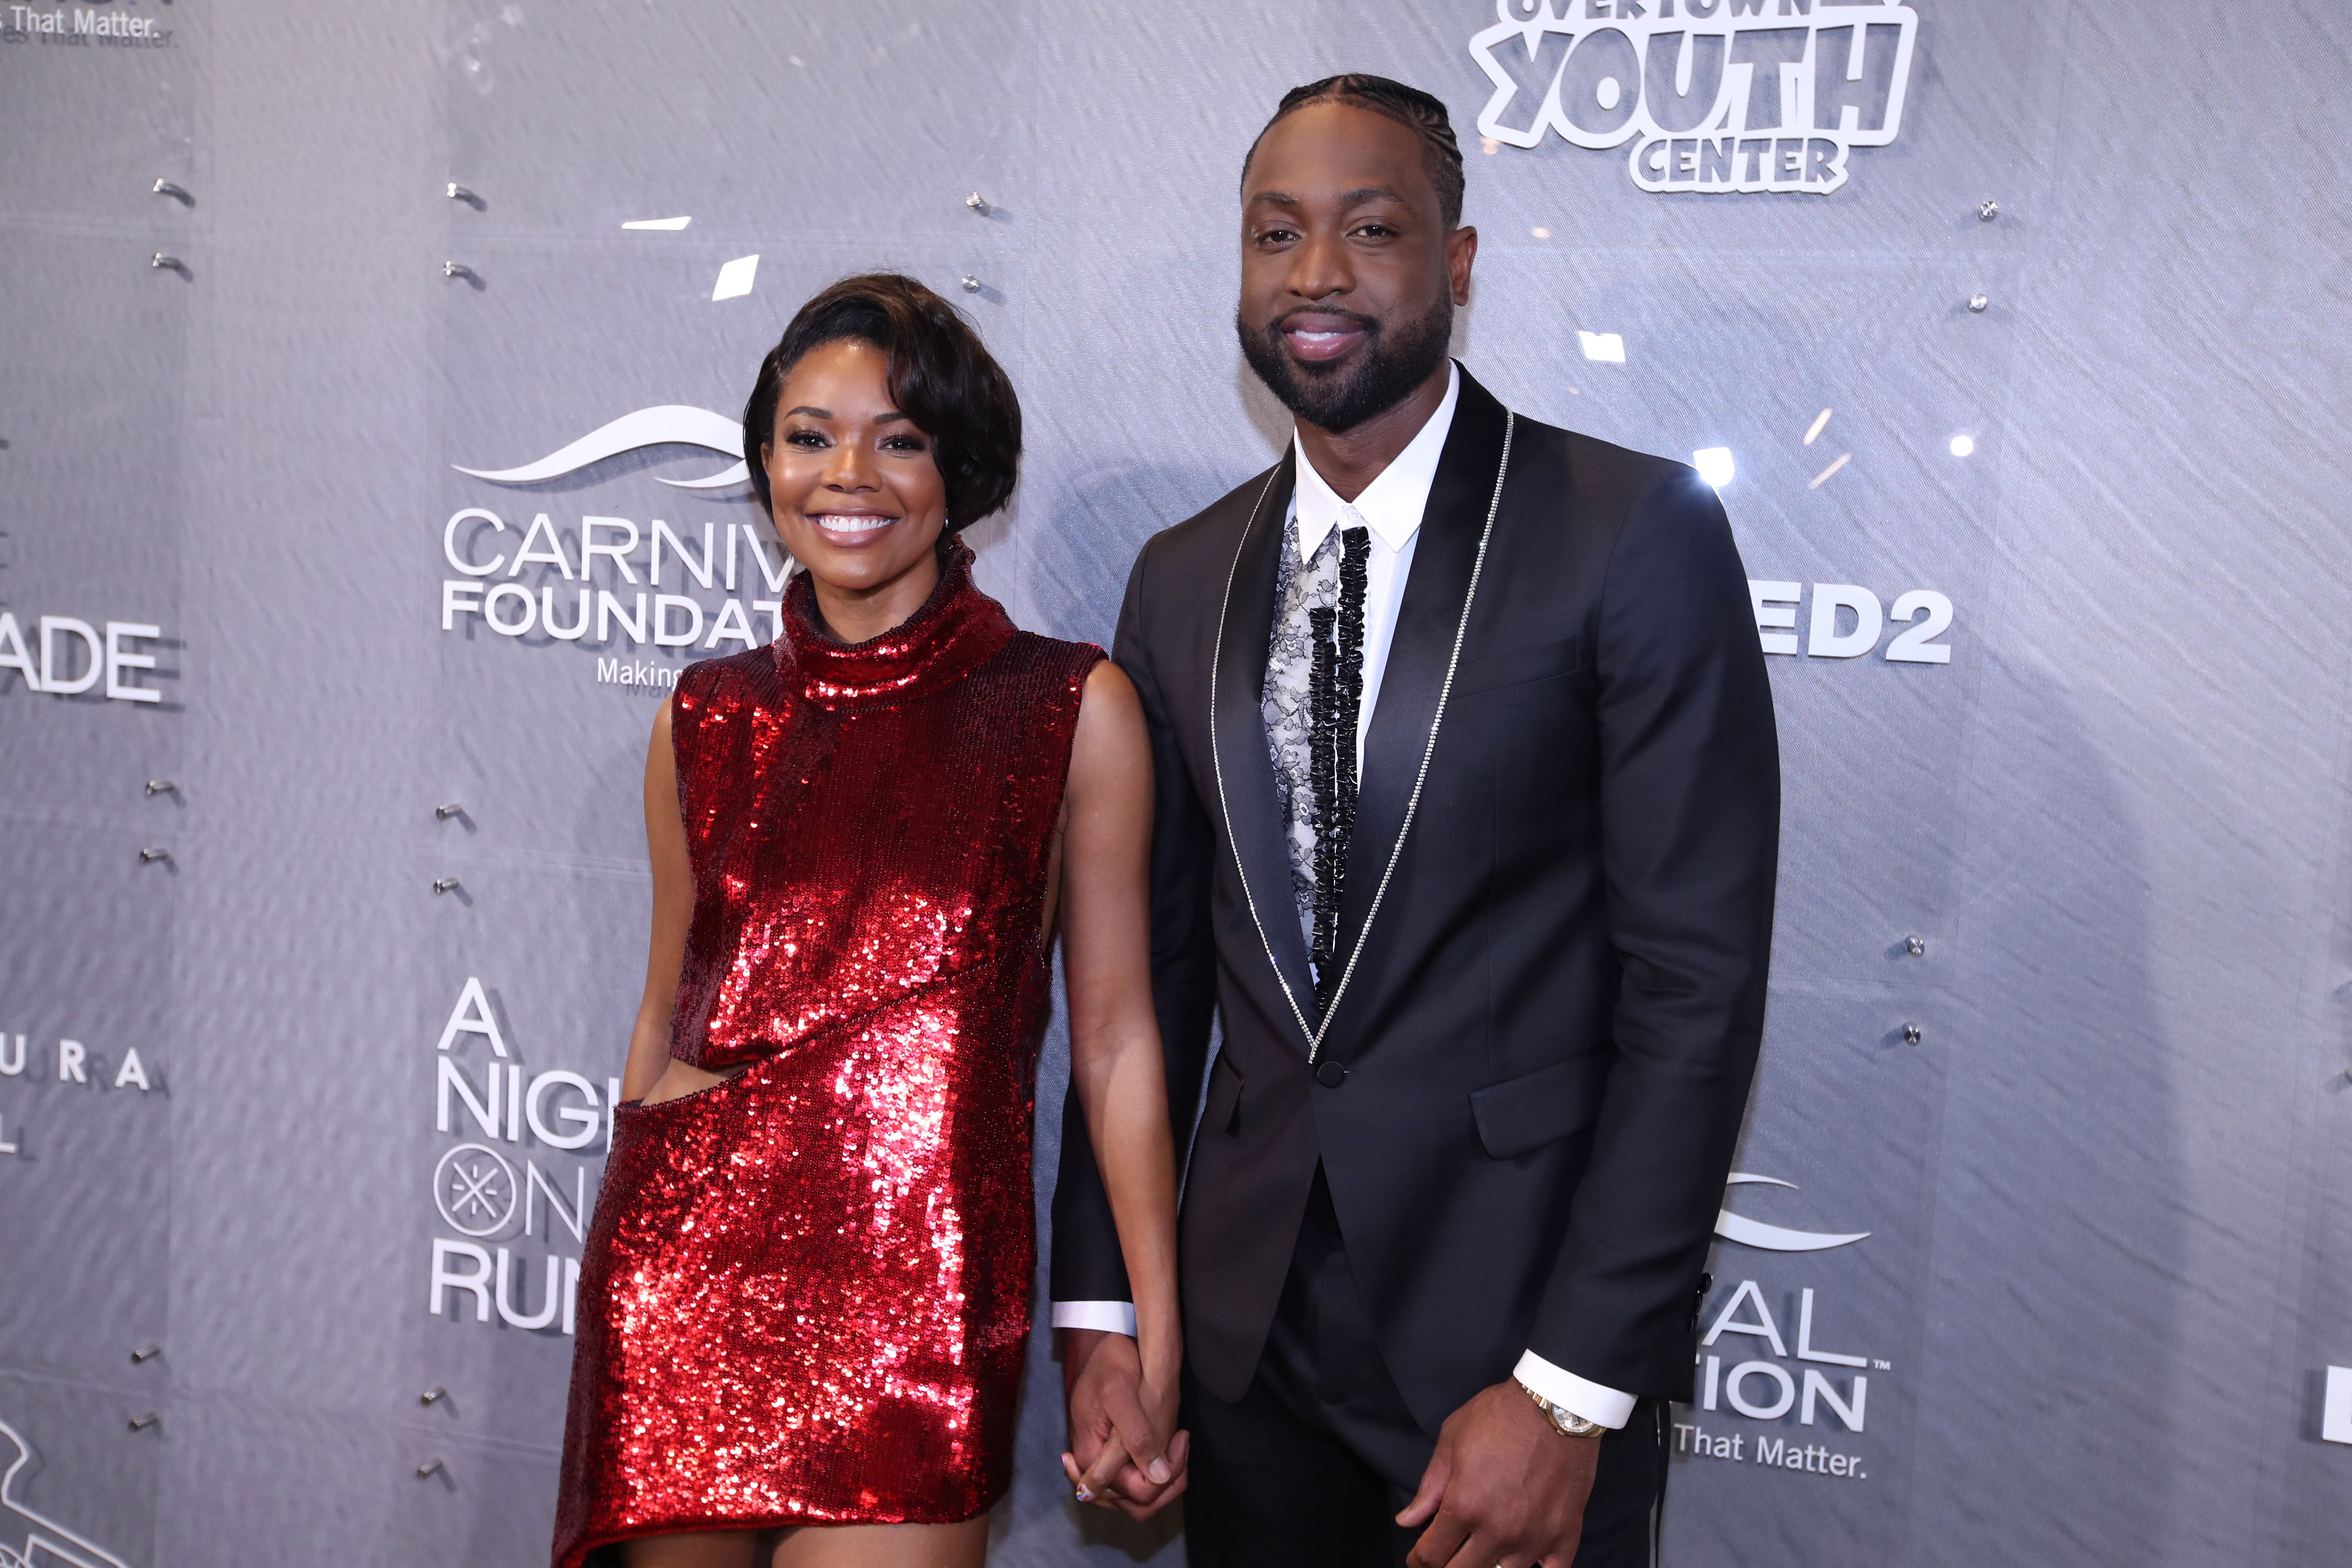 Gabrielle Union and Dwyane Wade during "A Night on the RunWade" at Level Three on March 16, 2019 in Miami, Florida. | Source: Getty Images